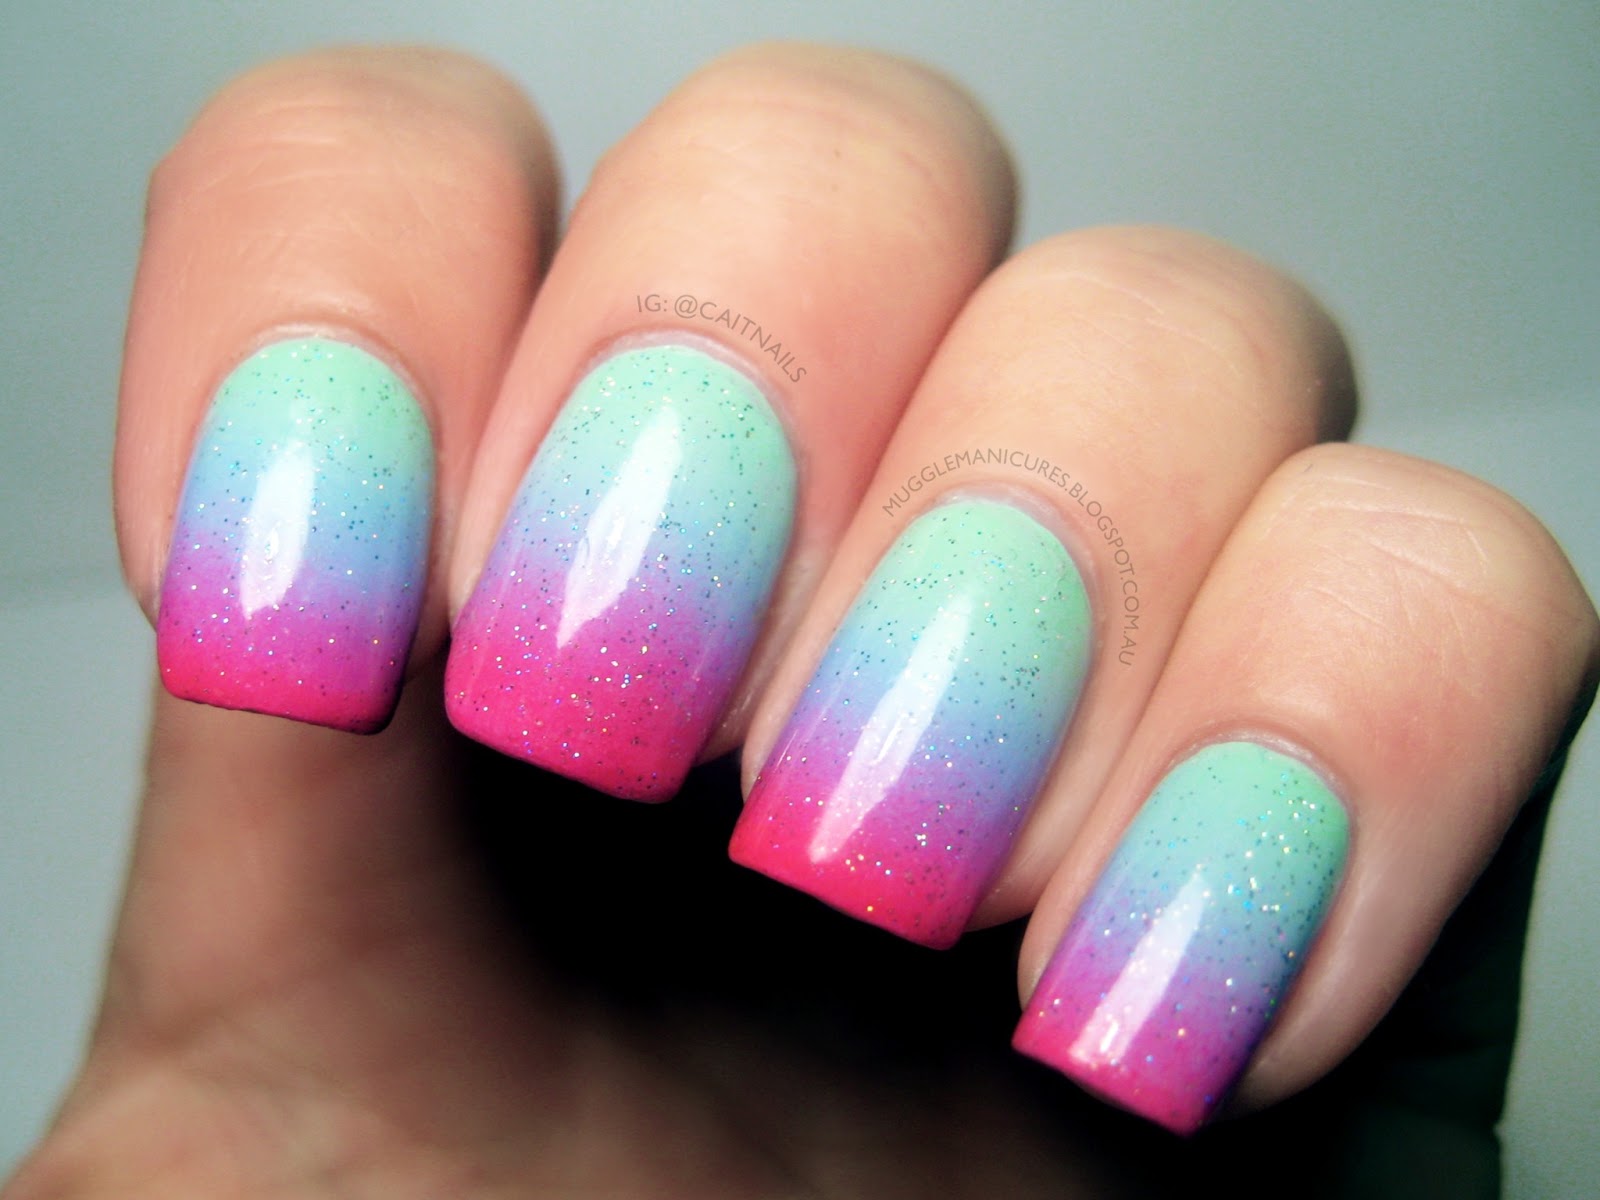 1. Gradient Nail Art Designs for a Chic and Easy Manicure - wide 9